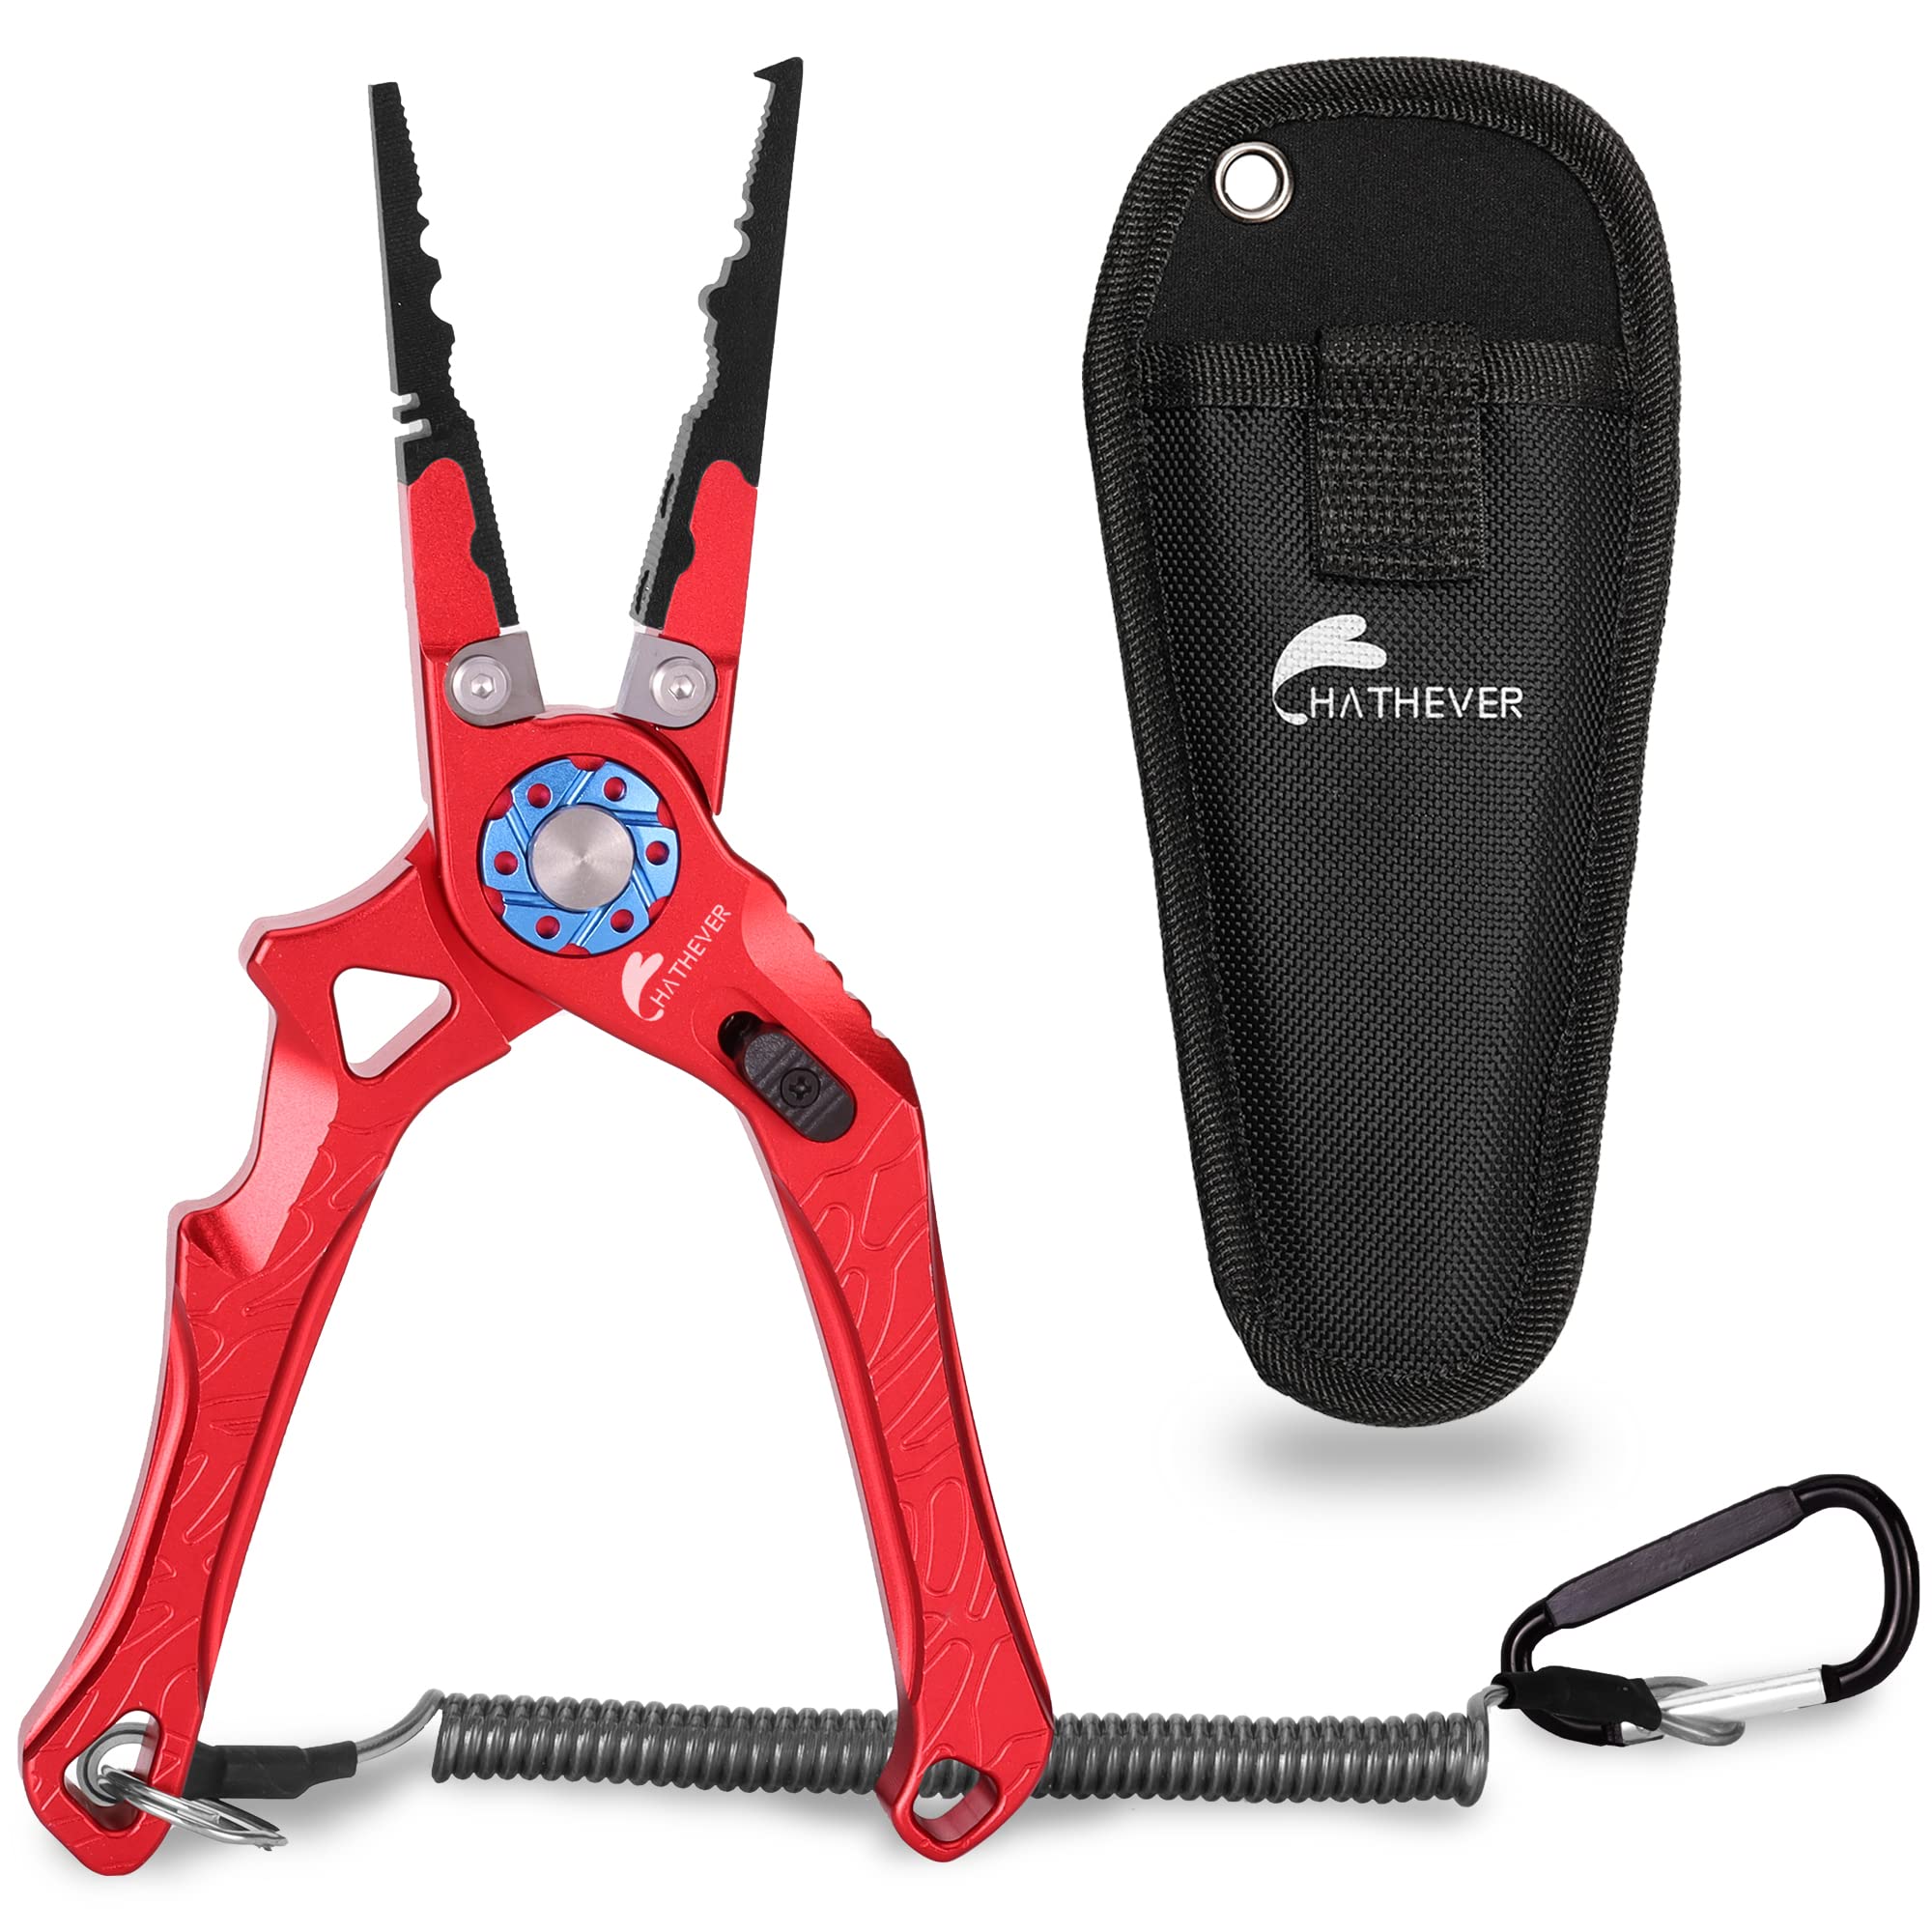 Aluminum Saltwater Fishing Pliers with Hook Remover Malaysia